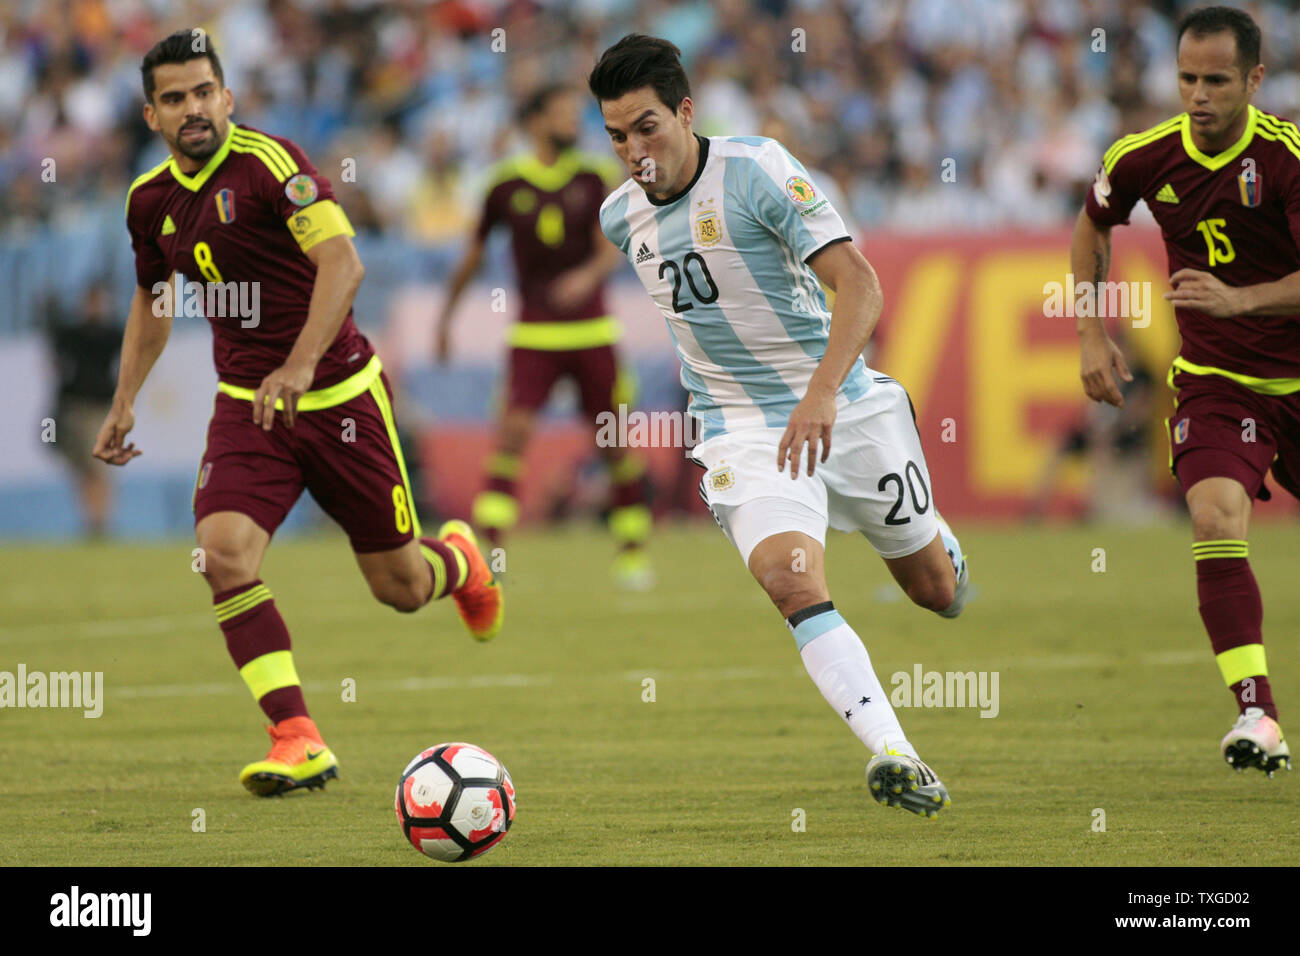 Argentina forward Nicolas Gaitan (20) charges down field as Venezuela midfielders Tomas Rincon (8) and Alejandro Guerra (15) give chase in the first half of the 2016 Copa America Centenario quarterfinal match at Gillette Stadium in Foxborough, Massachusetts on June 18, 2016. Argentina defeated Venezuela 4-1. Photo by Matthew Healey/UPI Stock Photo